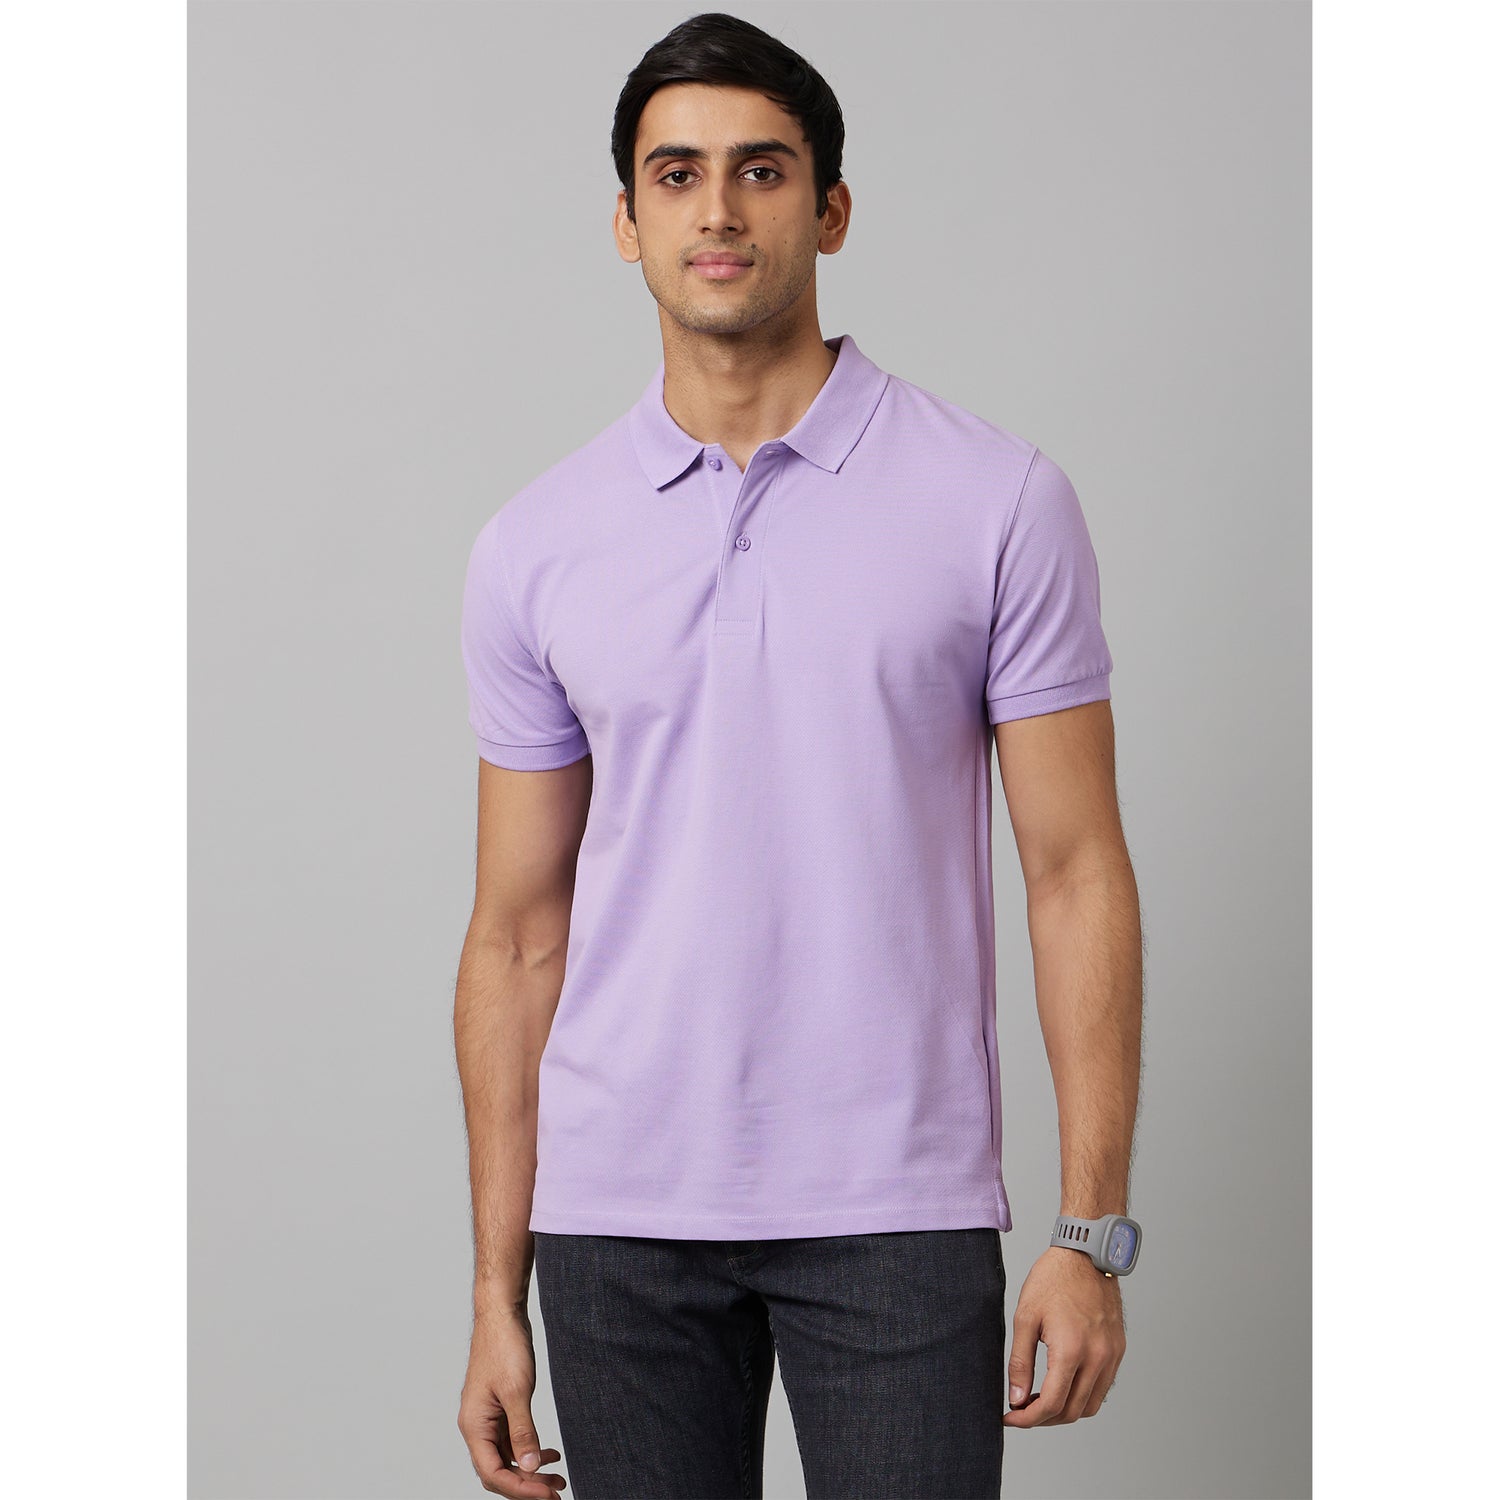 Purple Polo Collar Breathable Cotton T-shirt (TEONEPL)